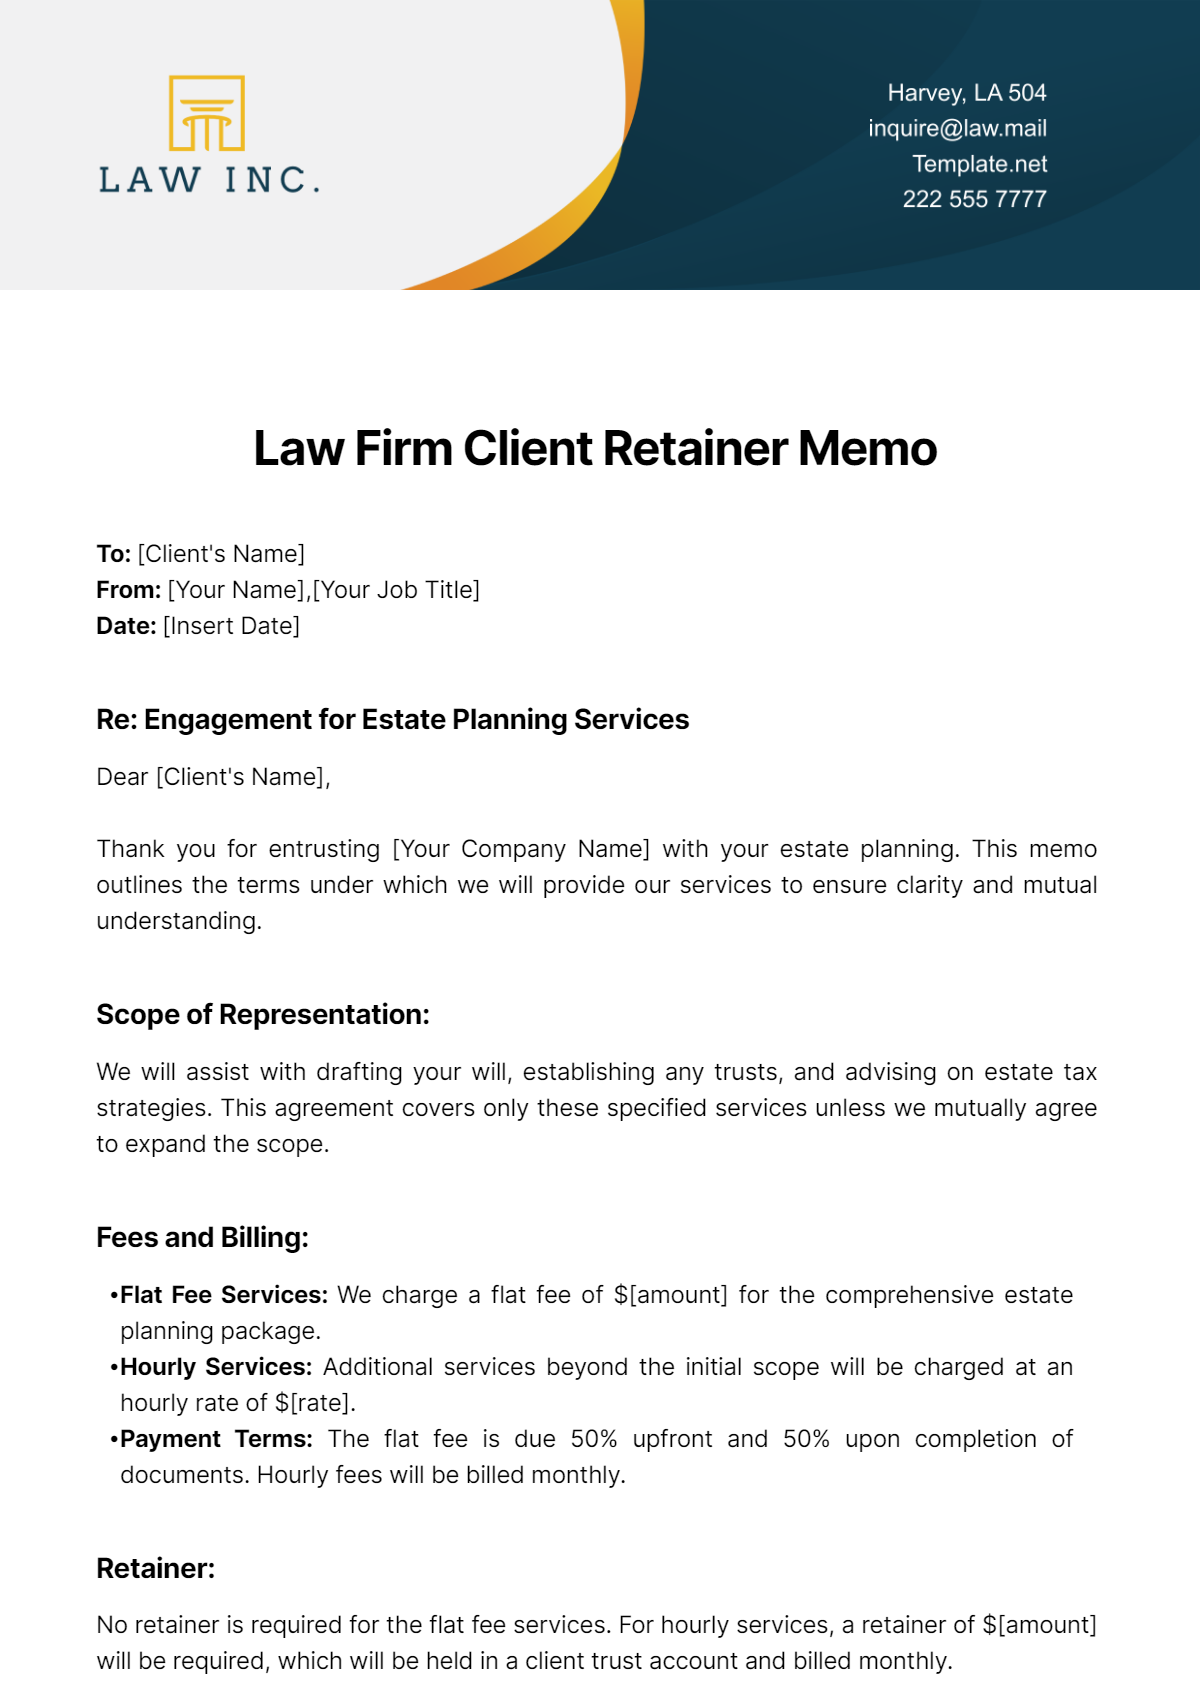 Law Firm Client Retainer Memo Template